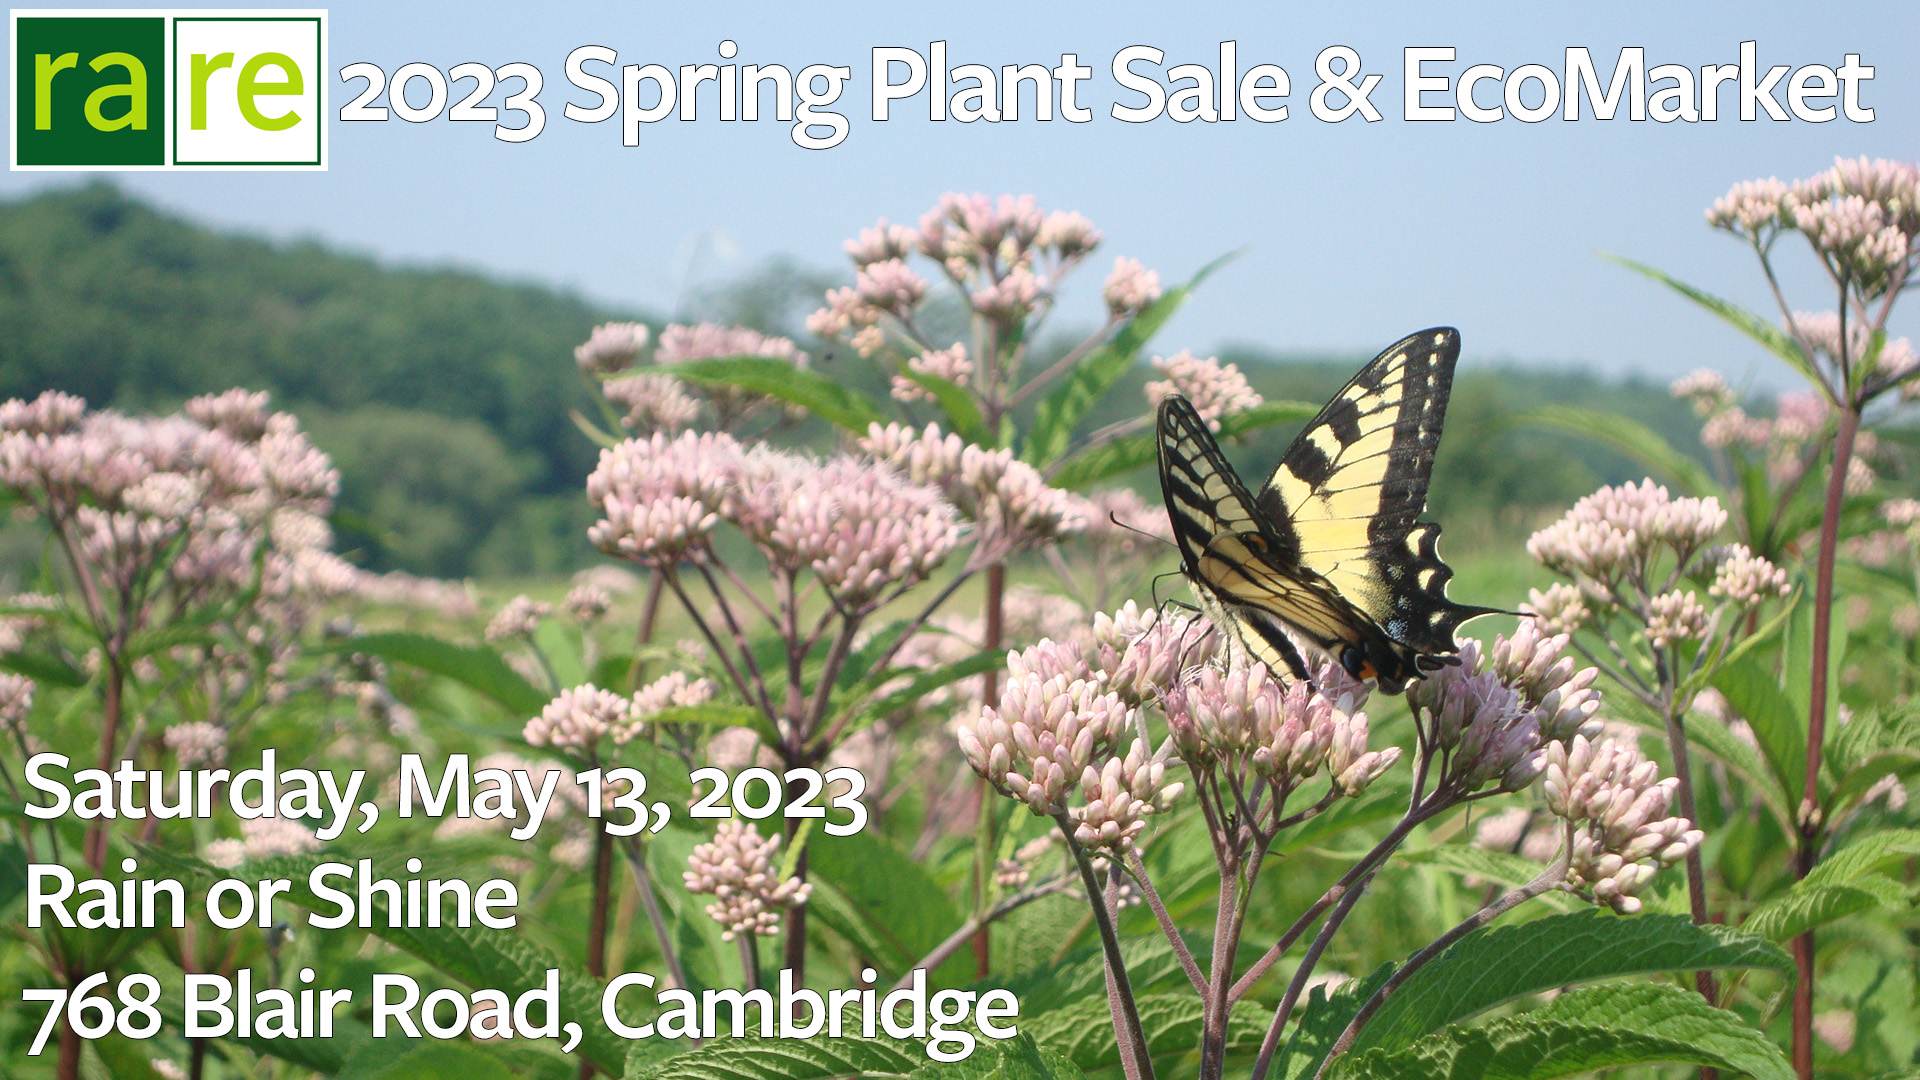 Spring Plant Sale and EcoMarket, taking place Saturday, May 13, rain or shine!